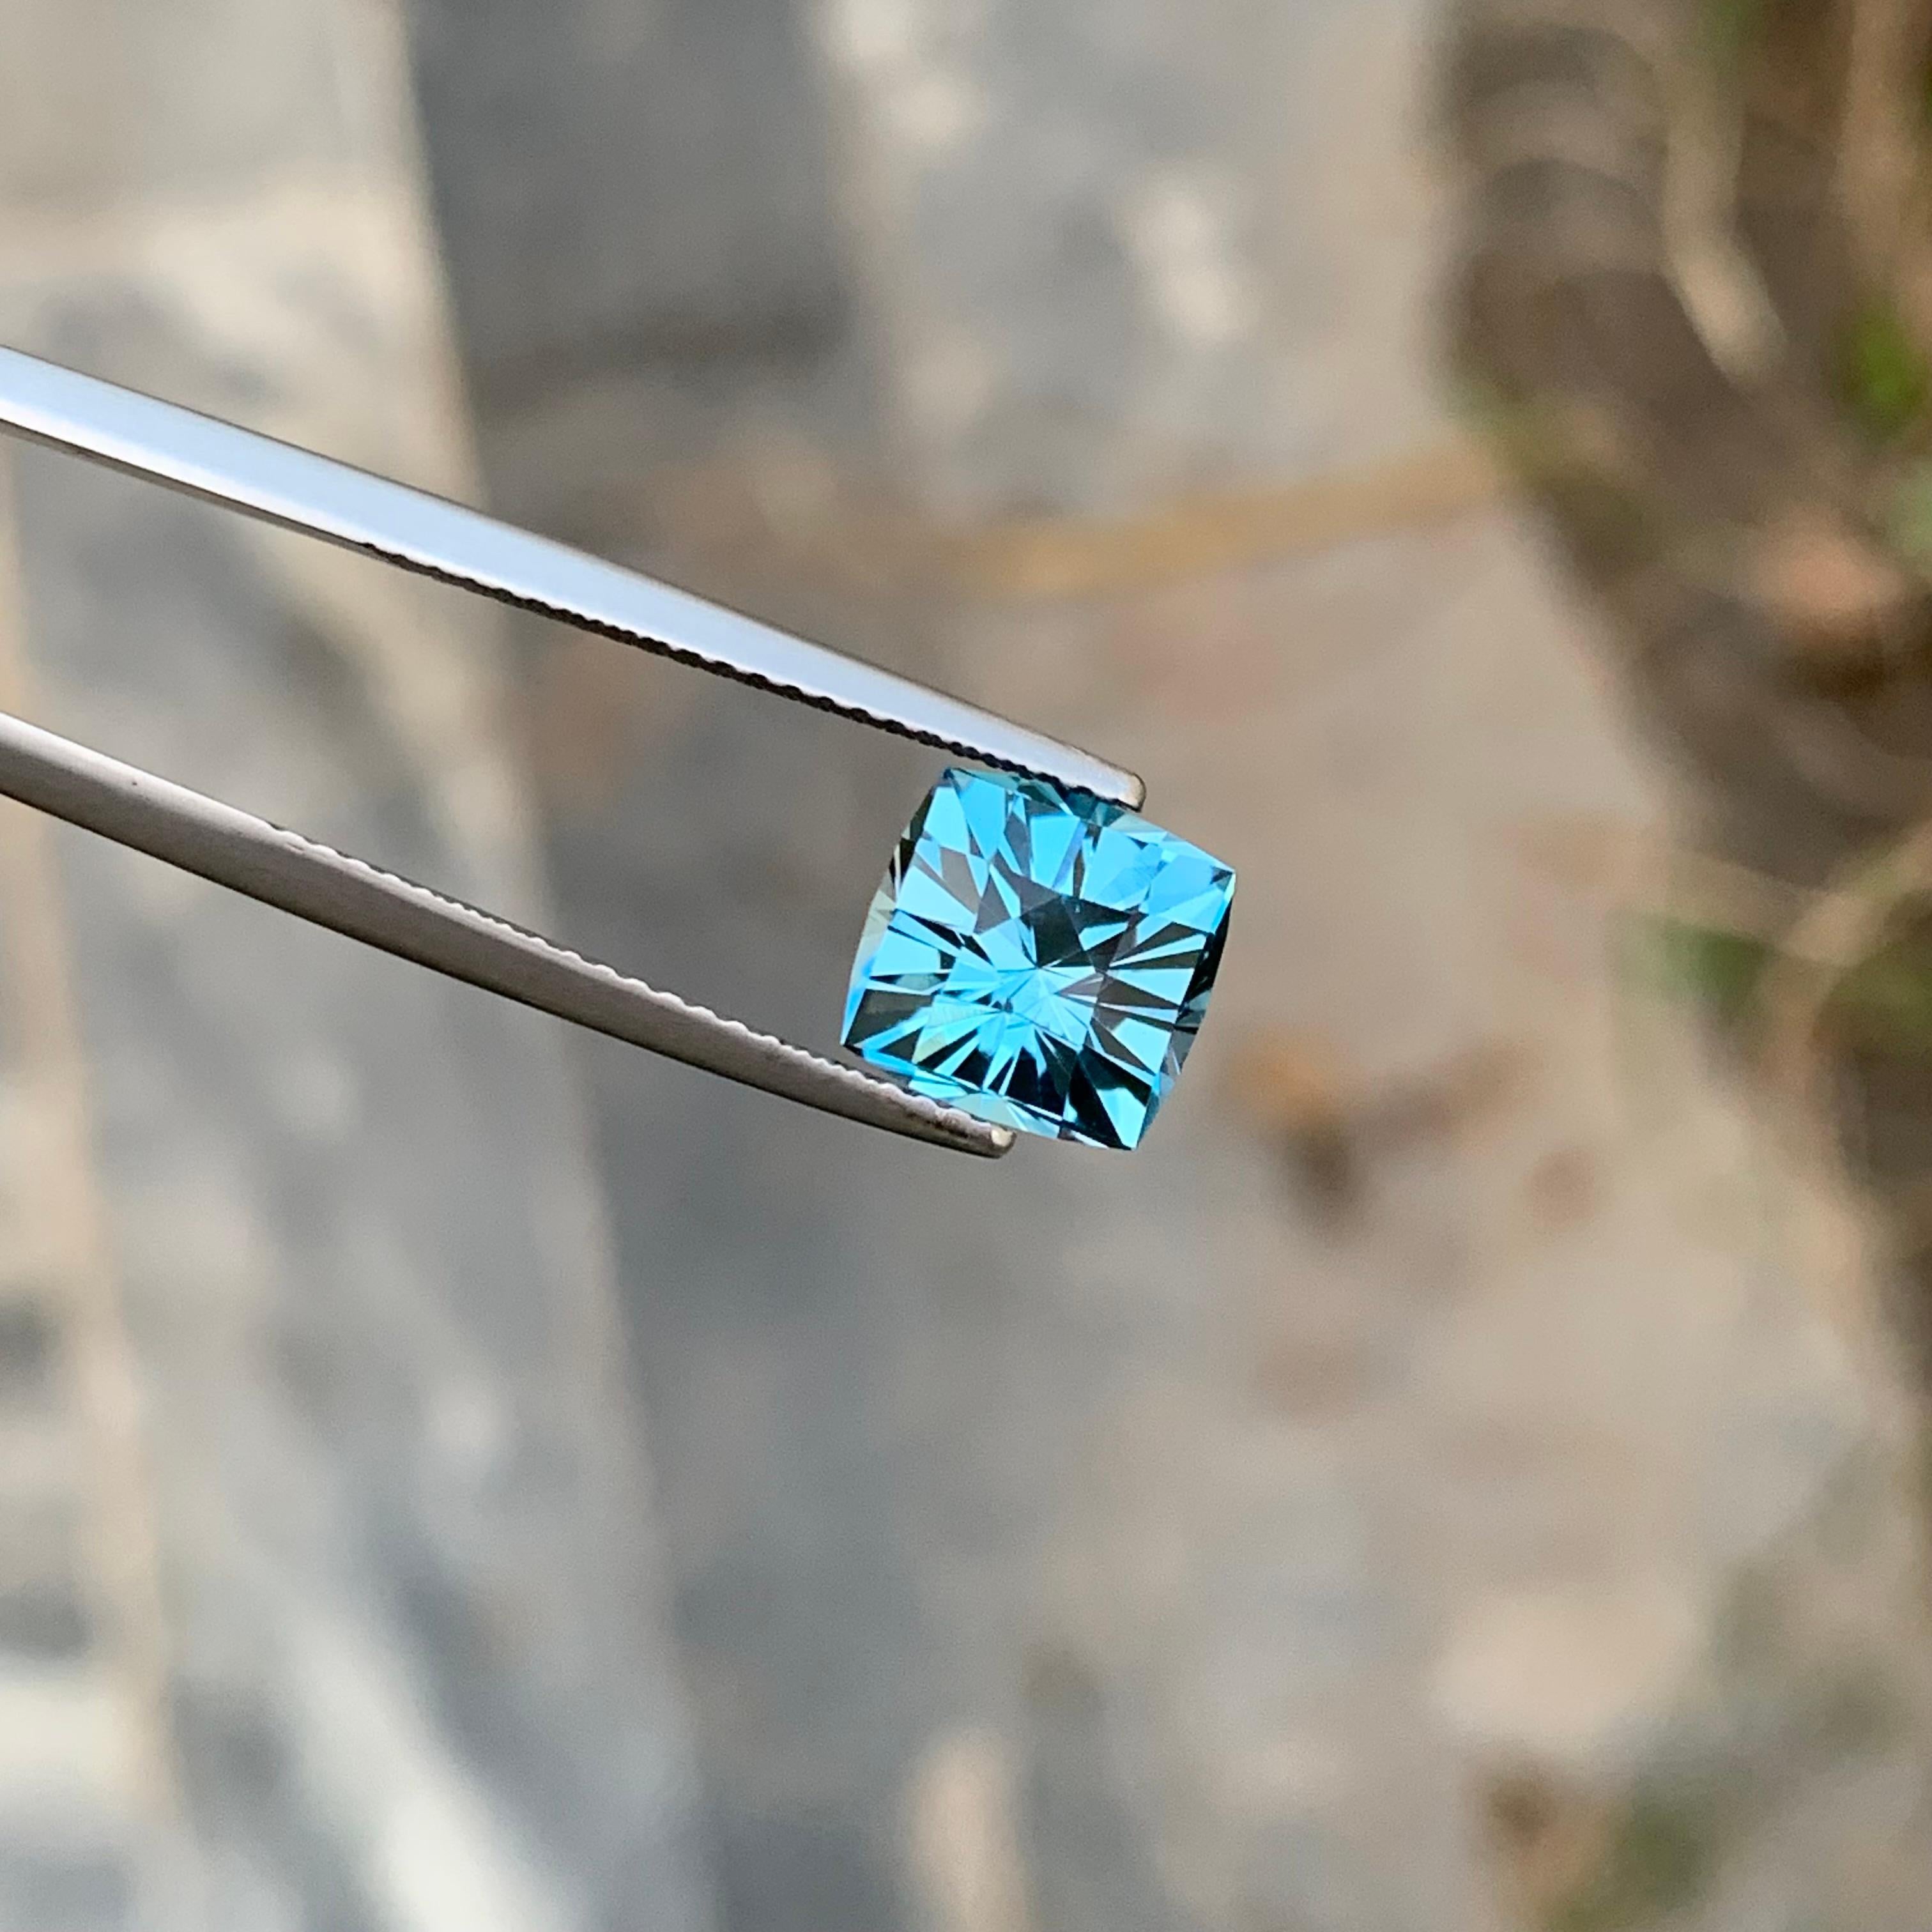 Loose London Blue Topaz

Weight: 3.45 Carats
Dimension: 8.1 x 7.8 x 6.7 Mm
Origin: Brazil
Shape: Square Fancy
Color: Deep Blue
Certificate: On Customer Demand

London Blue Topaz is a mesmerizing variety of topaz renowned for its deep and enchanting